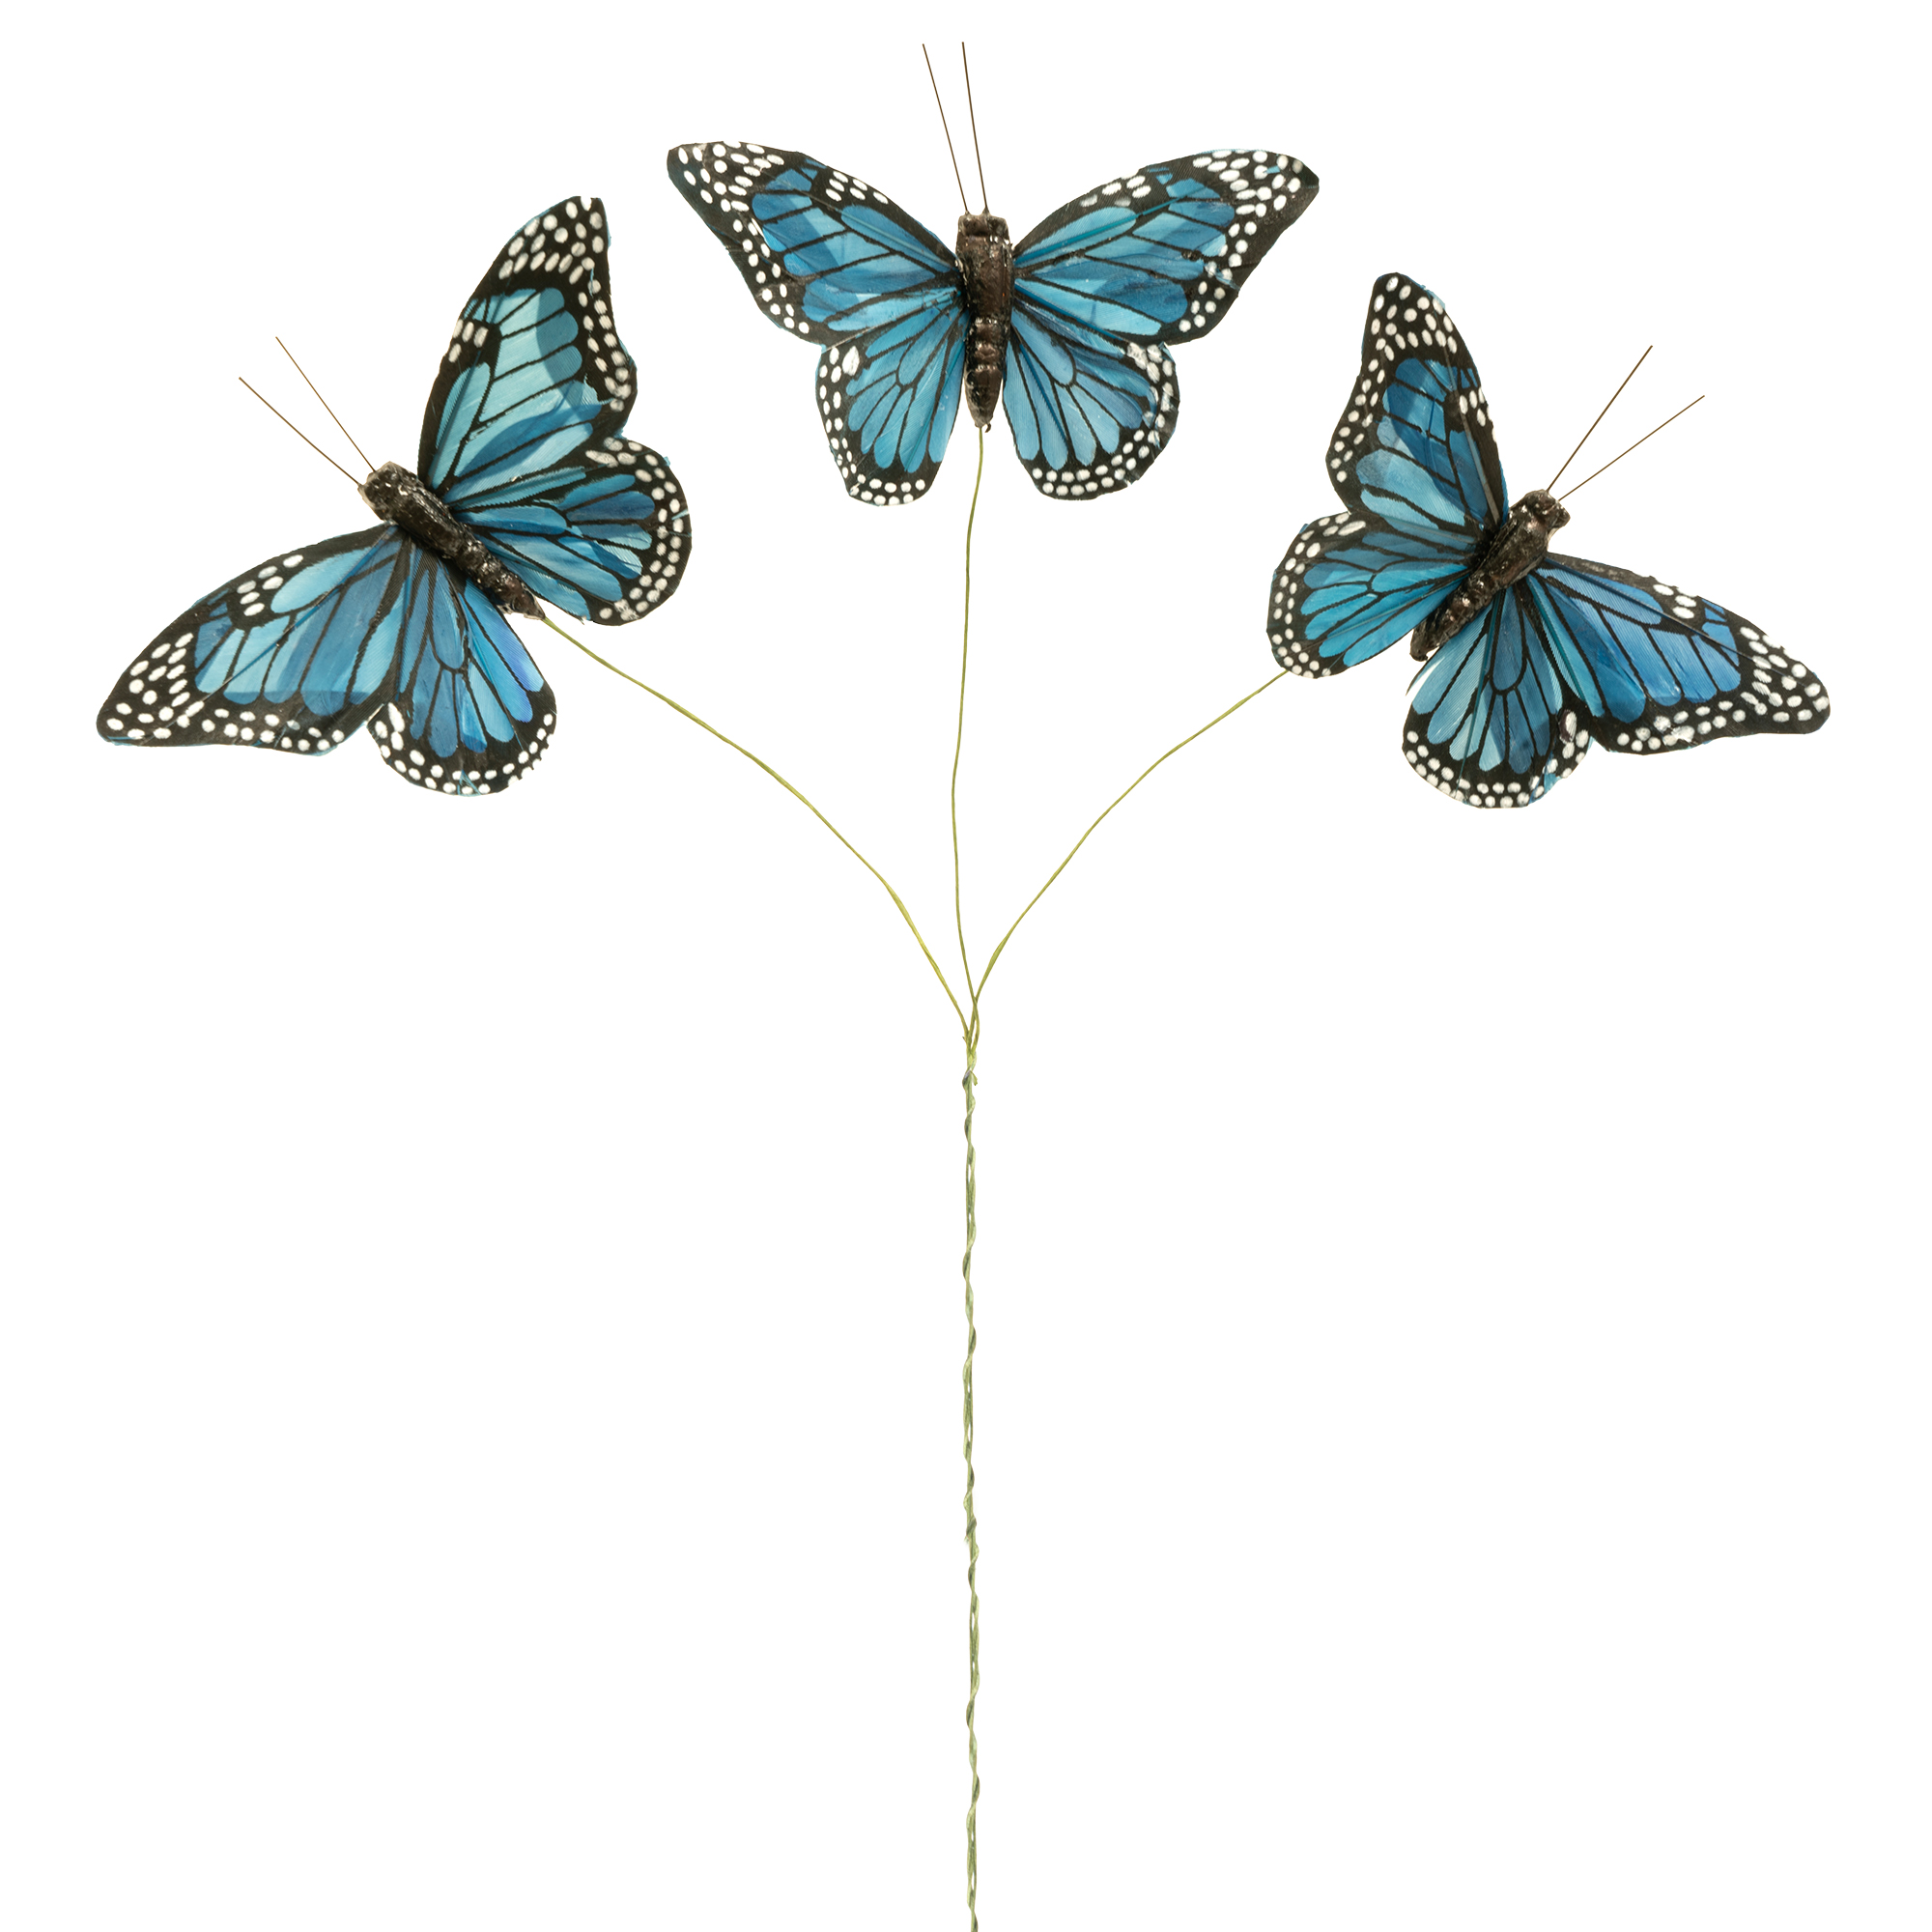 5" Artificial Monarch Butterfly 3pc/set with Wire - Blue